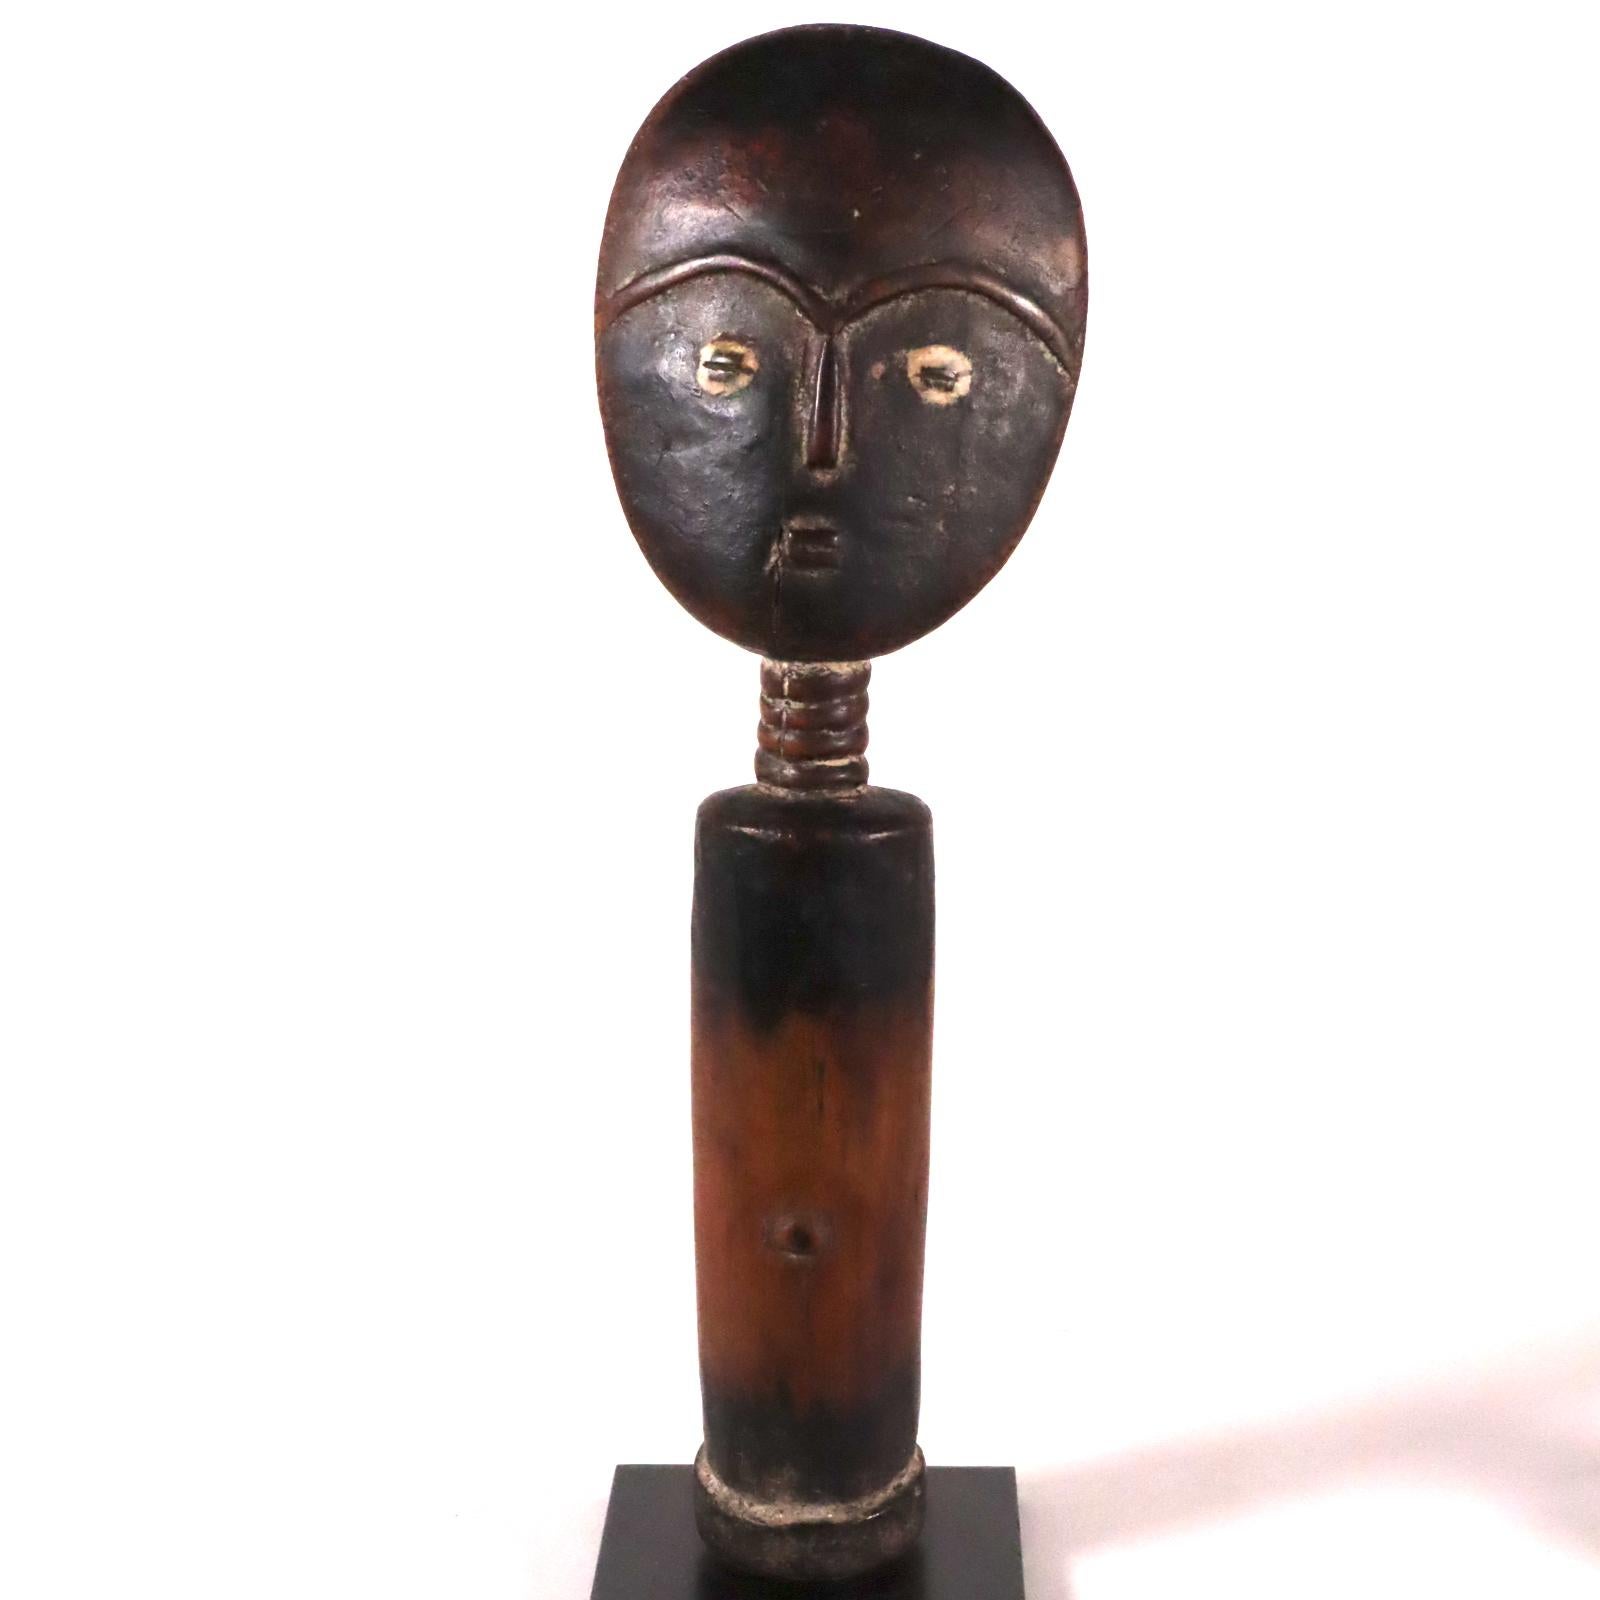 An old and obviously well used akuaba or fertility doll from the Akan people of Ghana, early 20th century. Wood with remains of white pigments, oily patina from ritual feeding, washing, and oiling. Since it was once clothed, the mid-section is